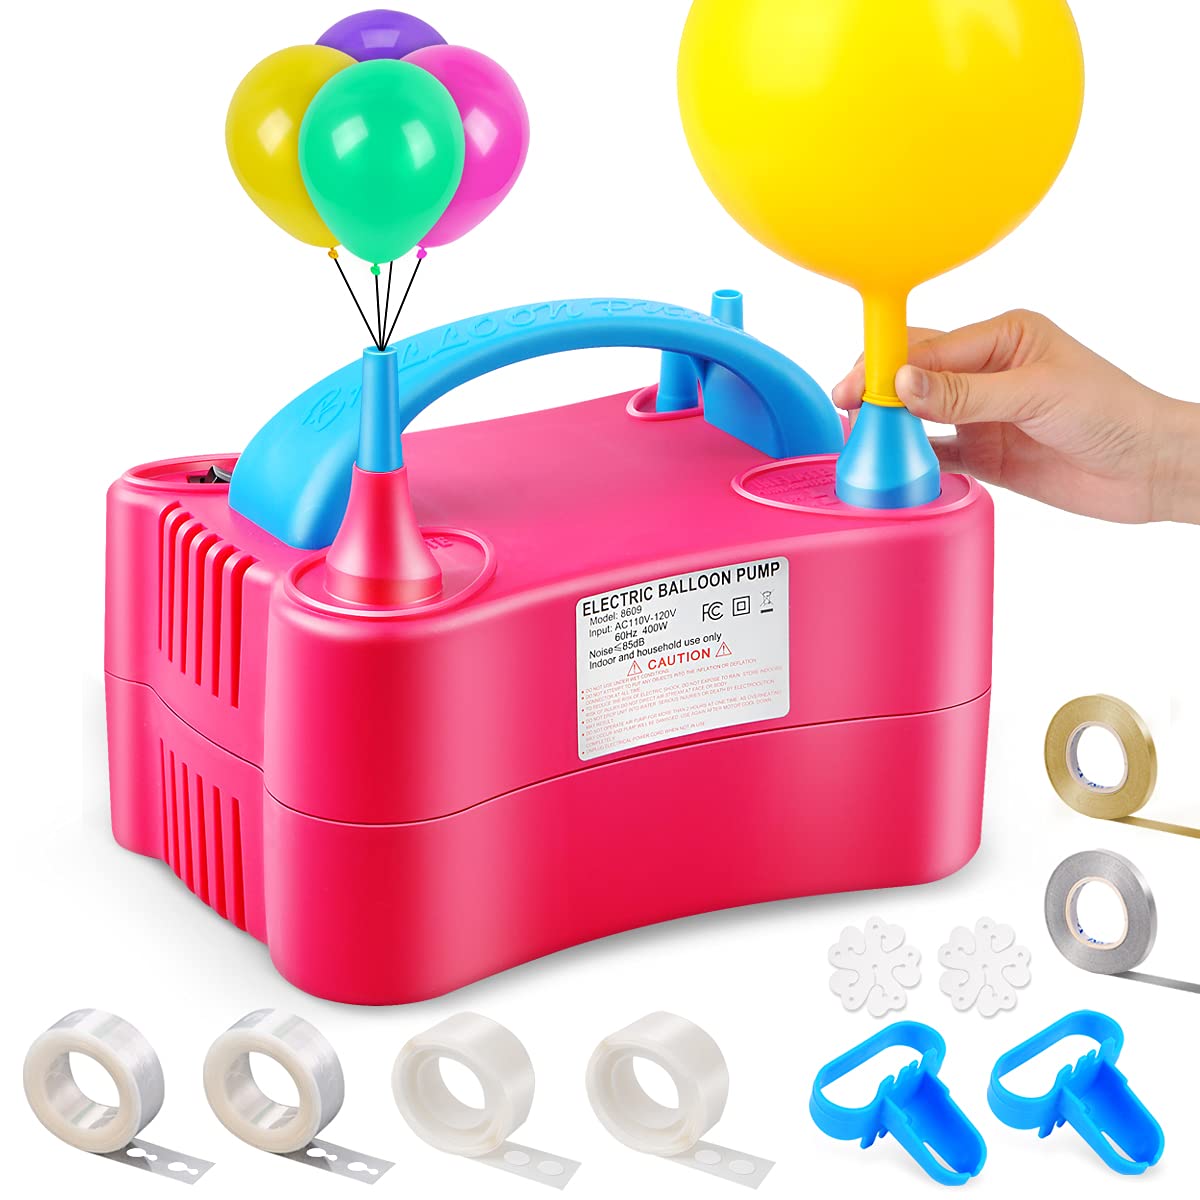 Balloon Pump Electric, Keaibuding Balloon Air Pump Dual Nozzle Balloon Inflator Blower with Balloon Arch Strip Kit for Party Supplies Baby Shower Decorations